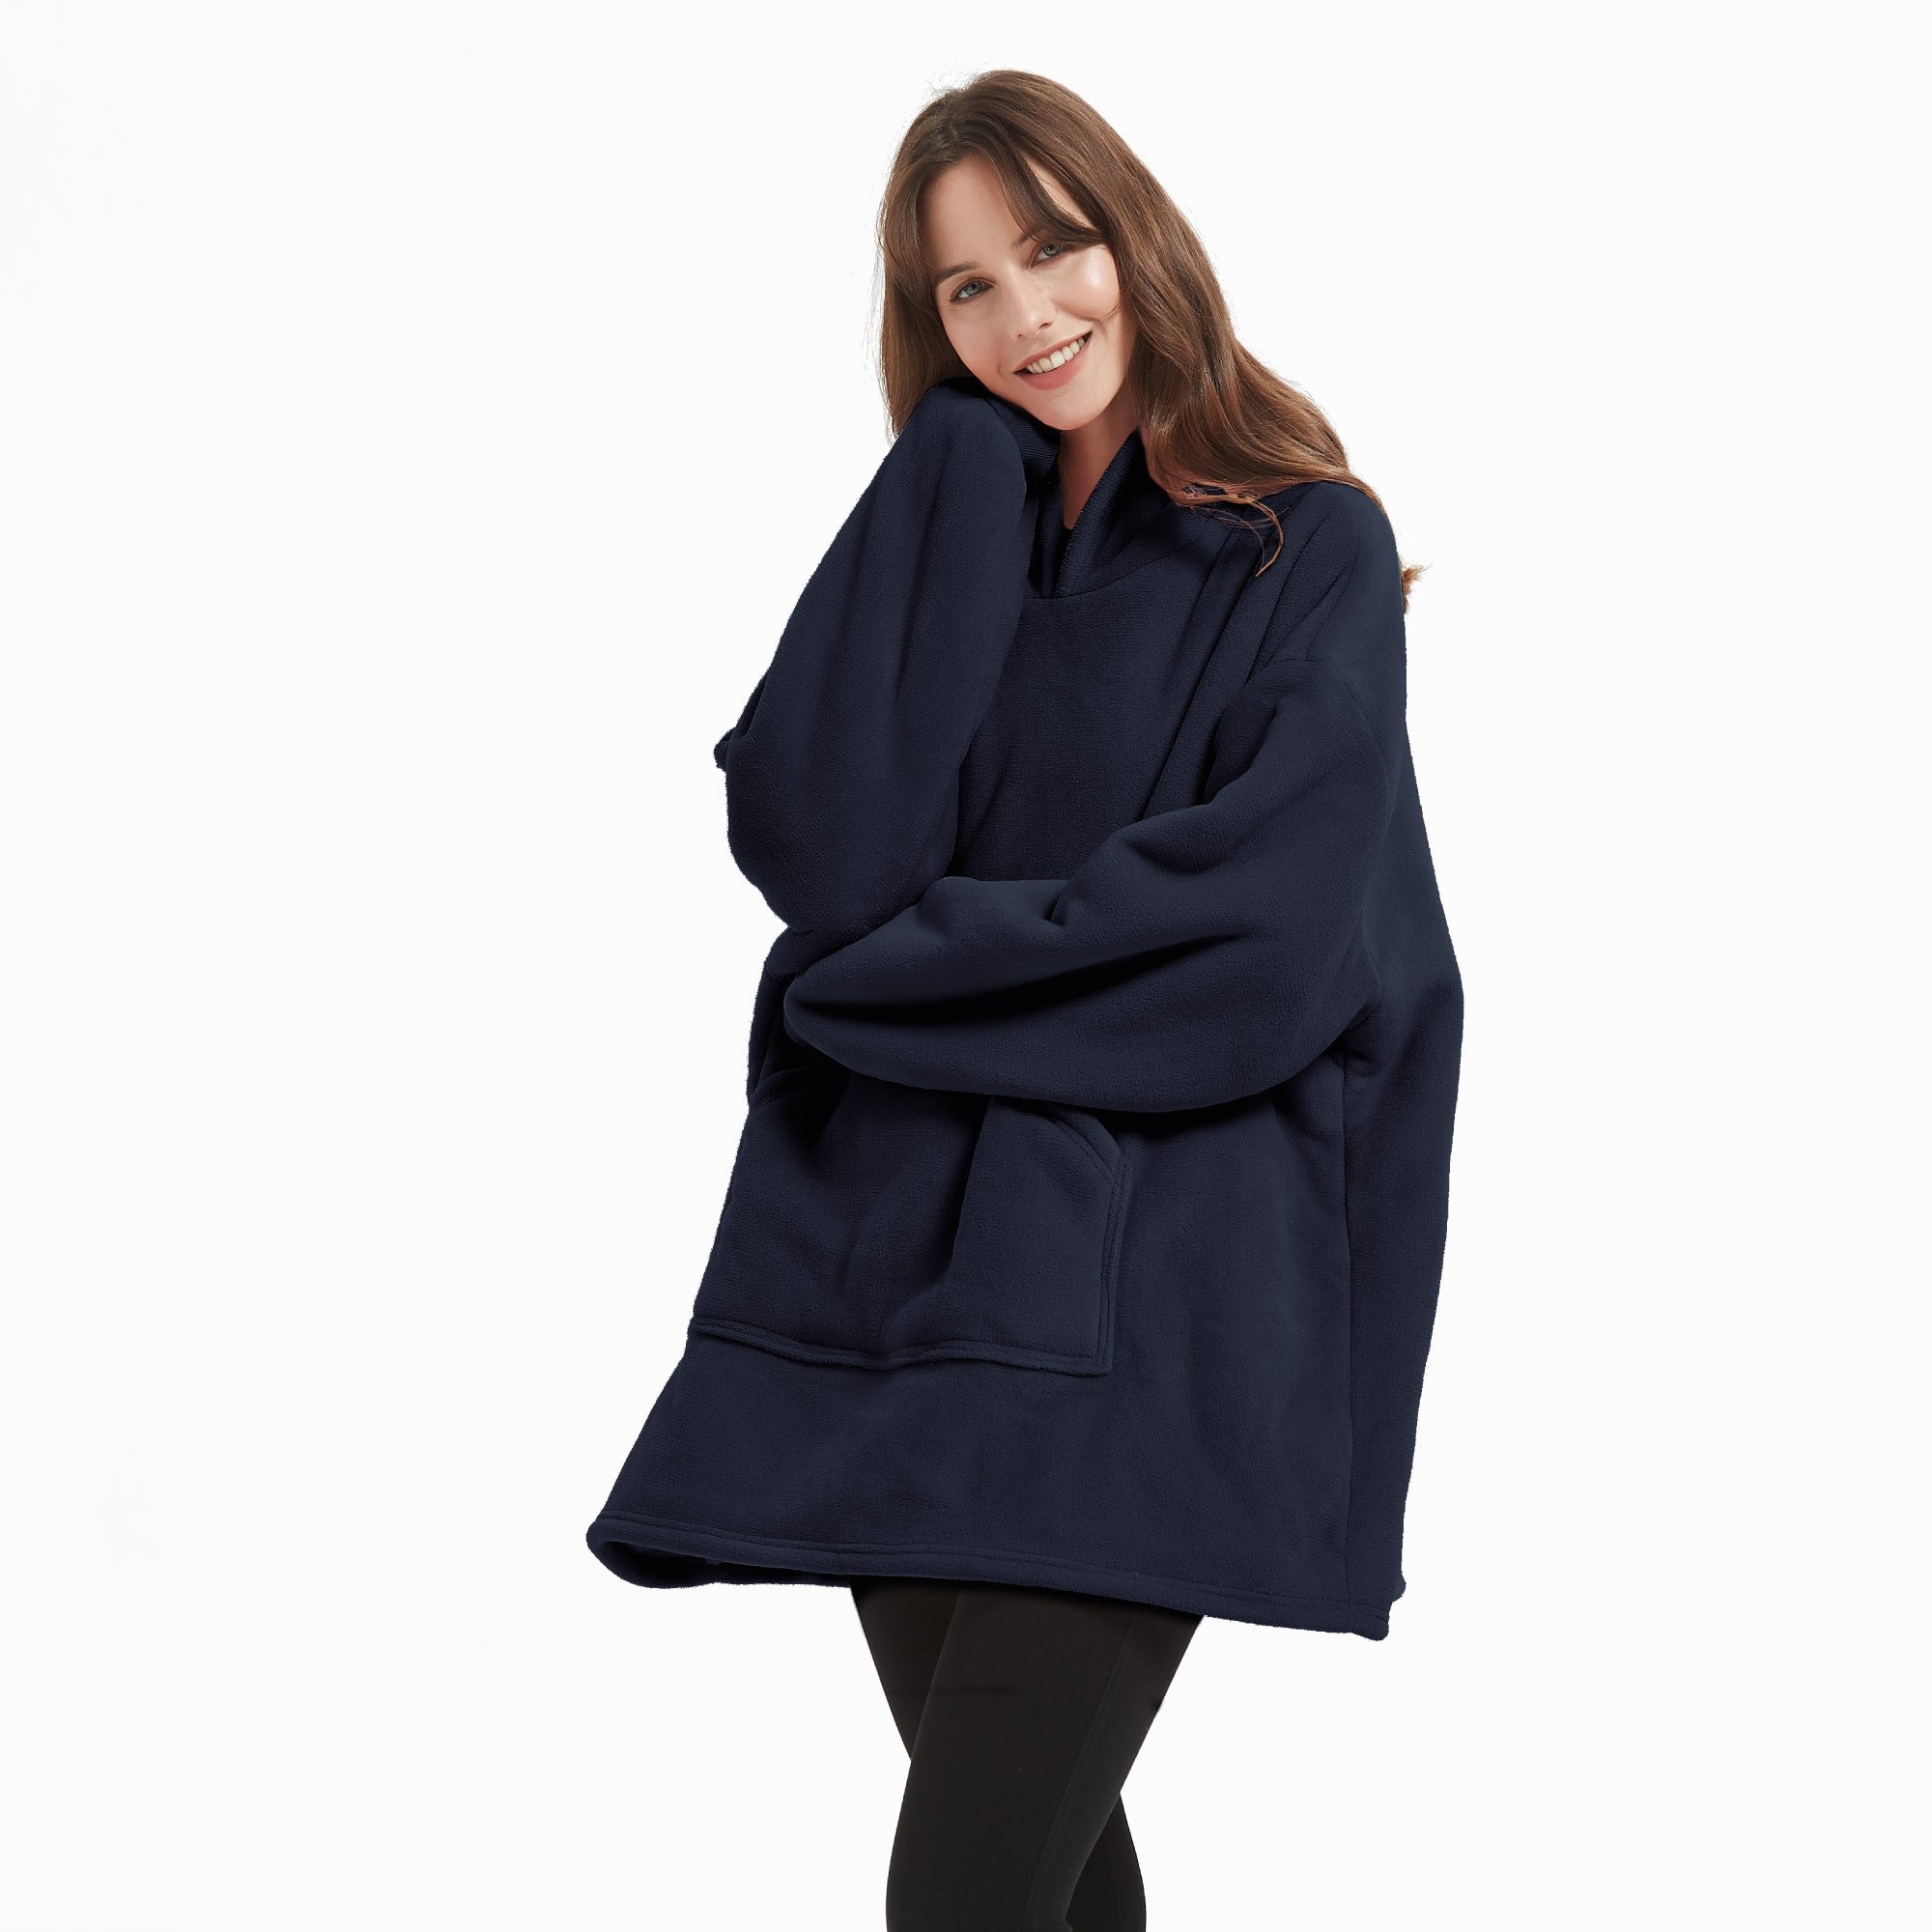 Lewis’s Sherpa Fleece Lined Hooded Throw Unisex - One Size - Navy  | TJ Hughes Teal